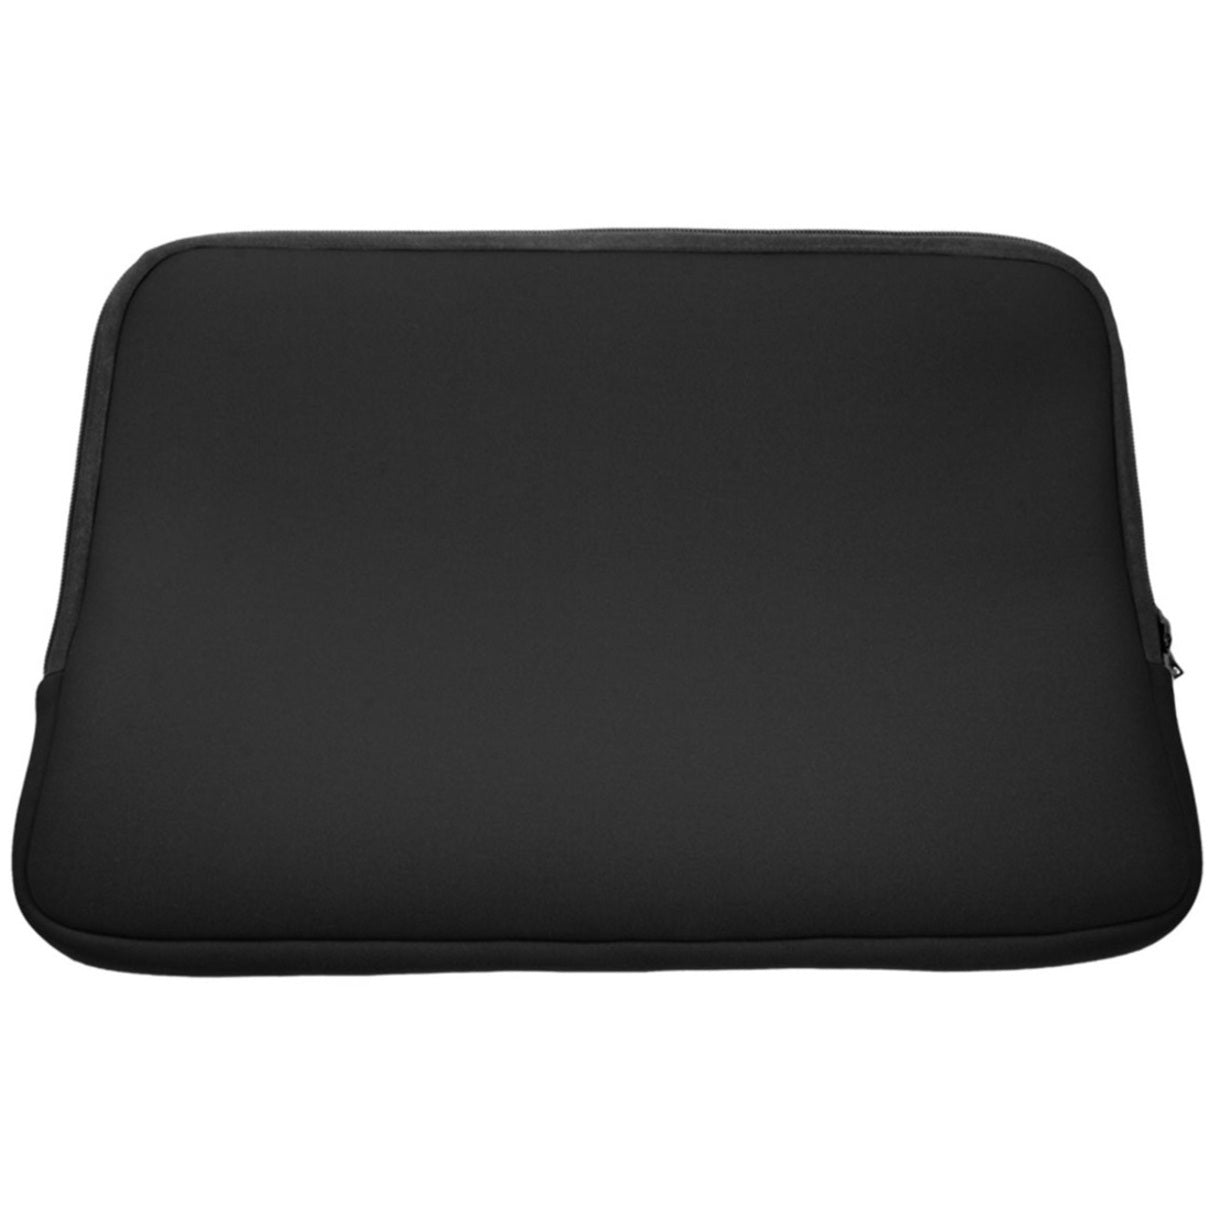 OTM S1-SLEEVE.15 15" Black Tablet Sleeve, Dust and Scratch Resistant